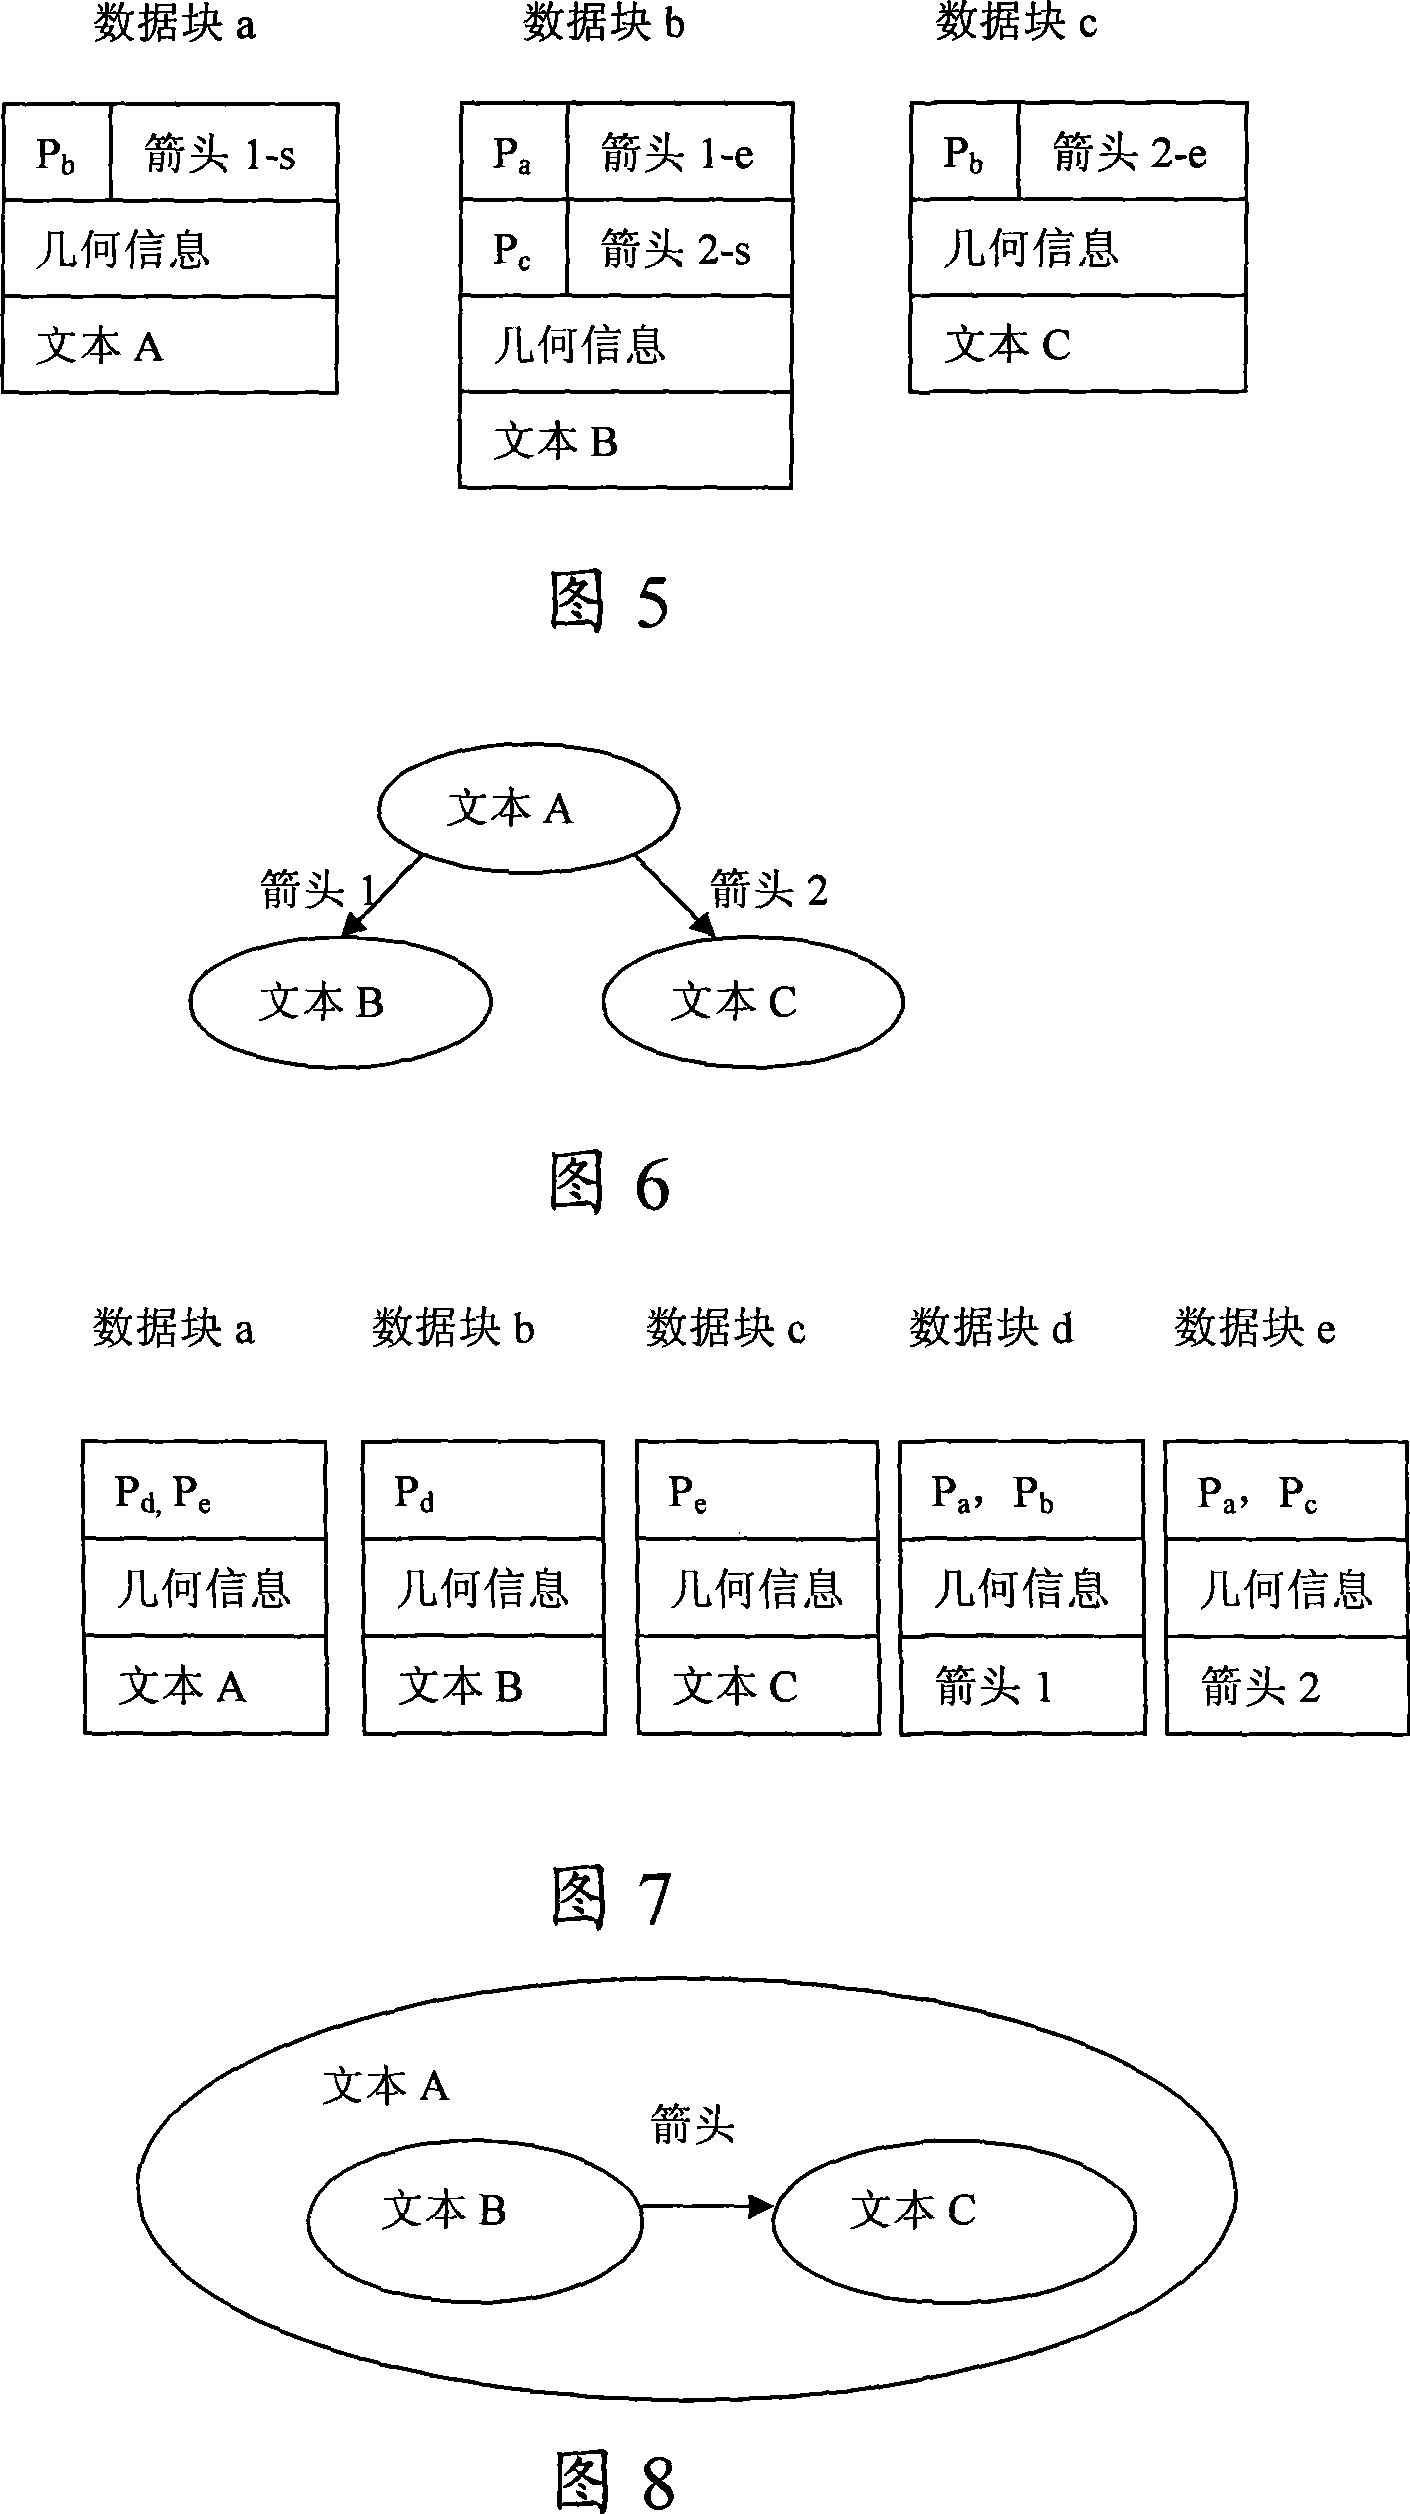 Index, search, storage and display control information systems for associated data